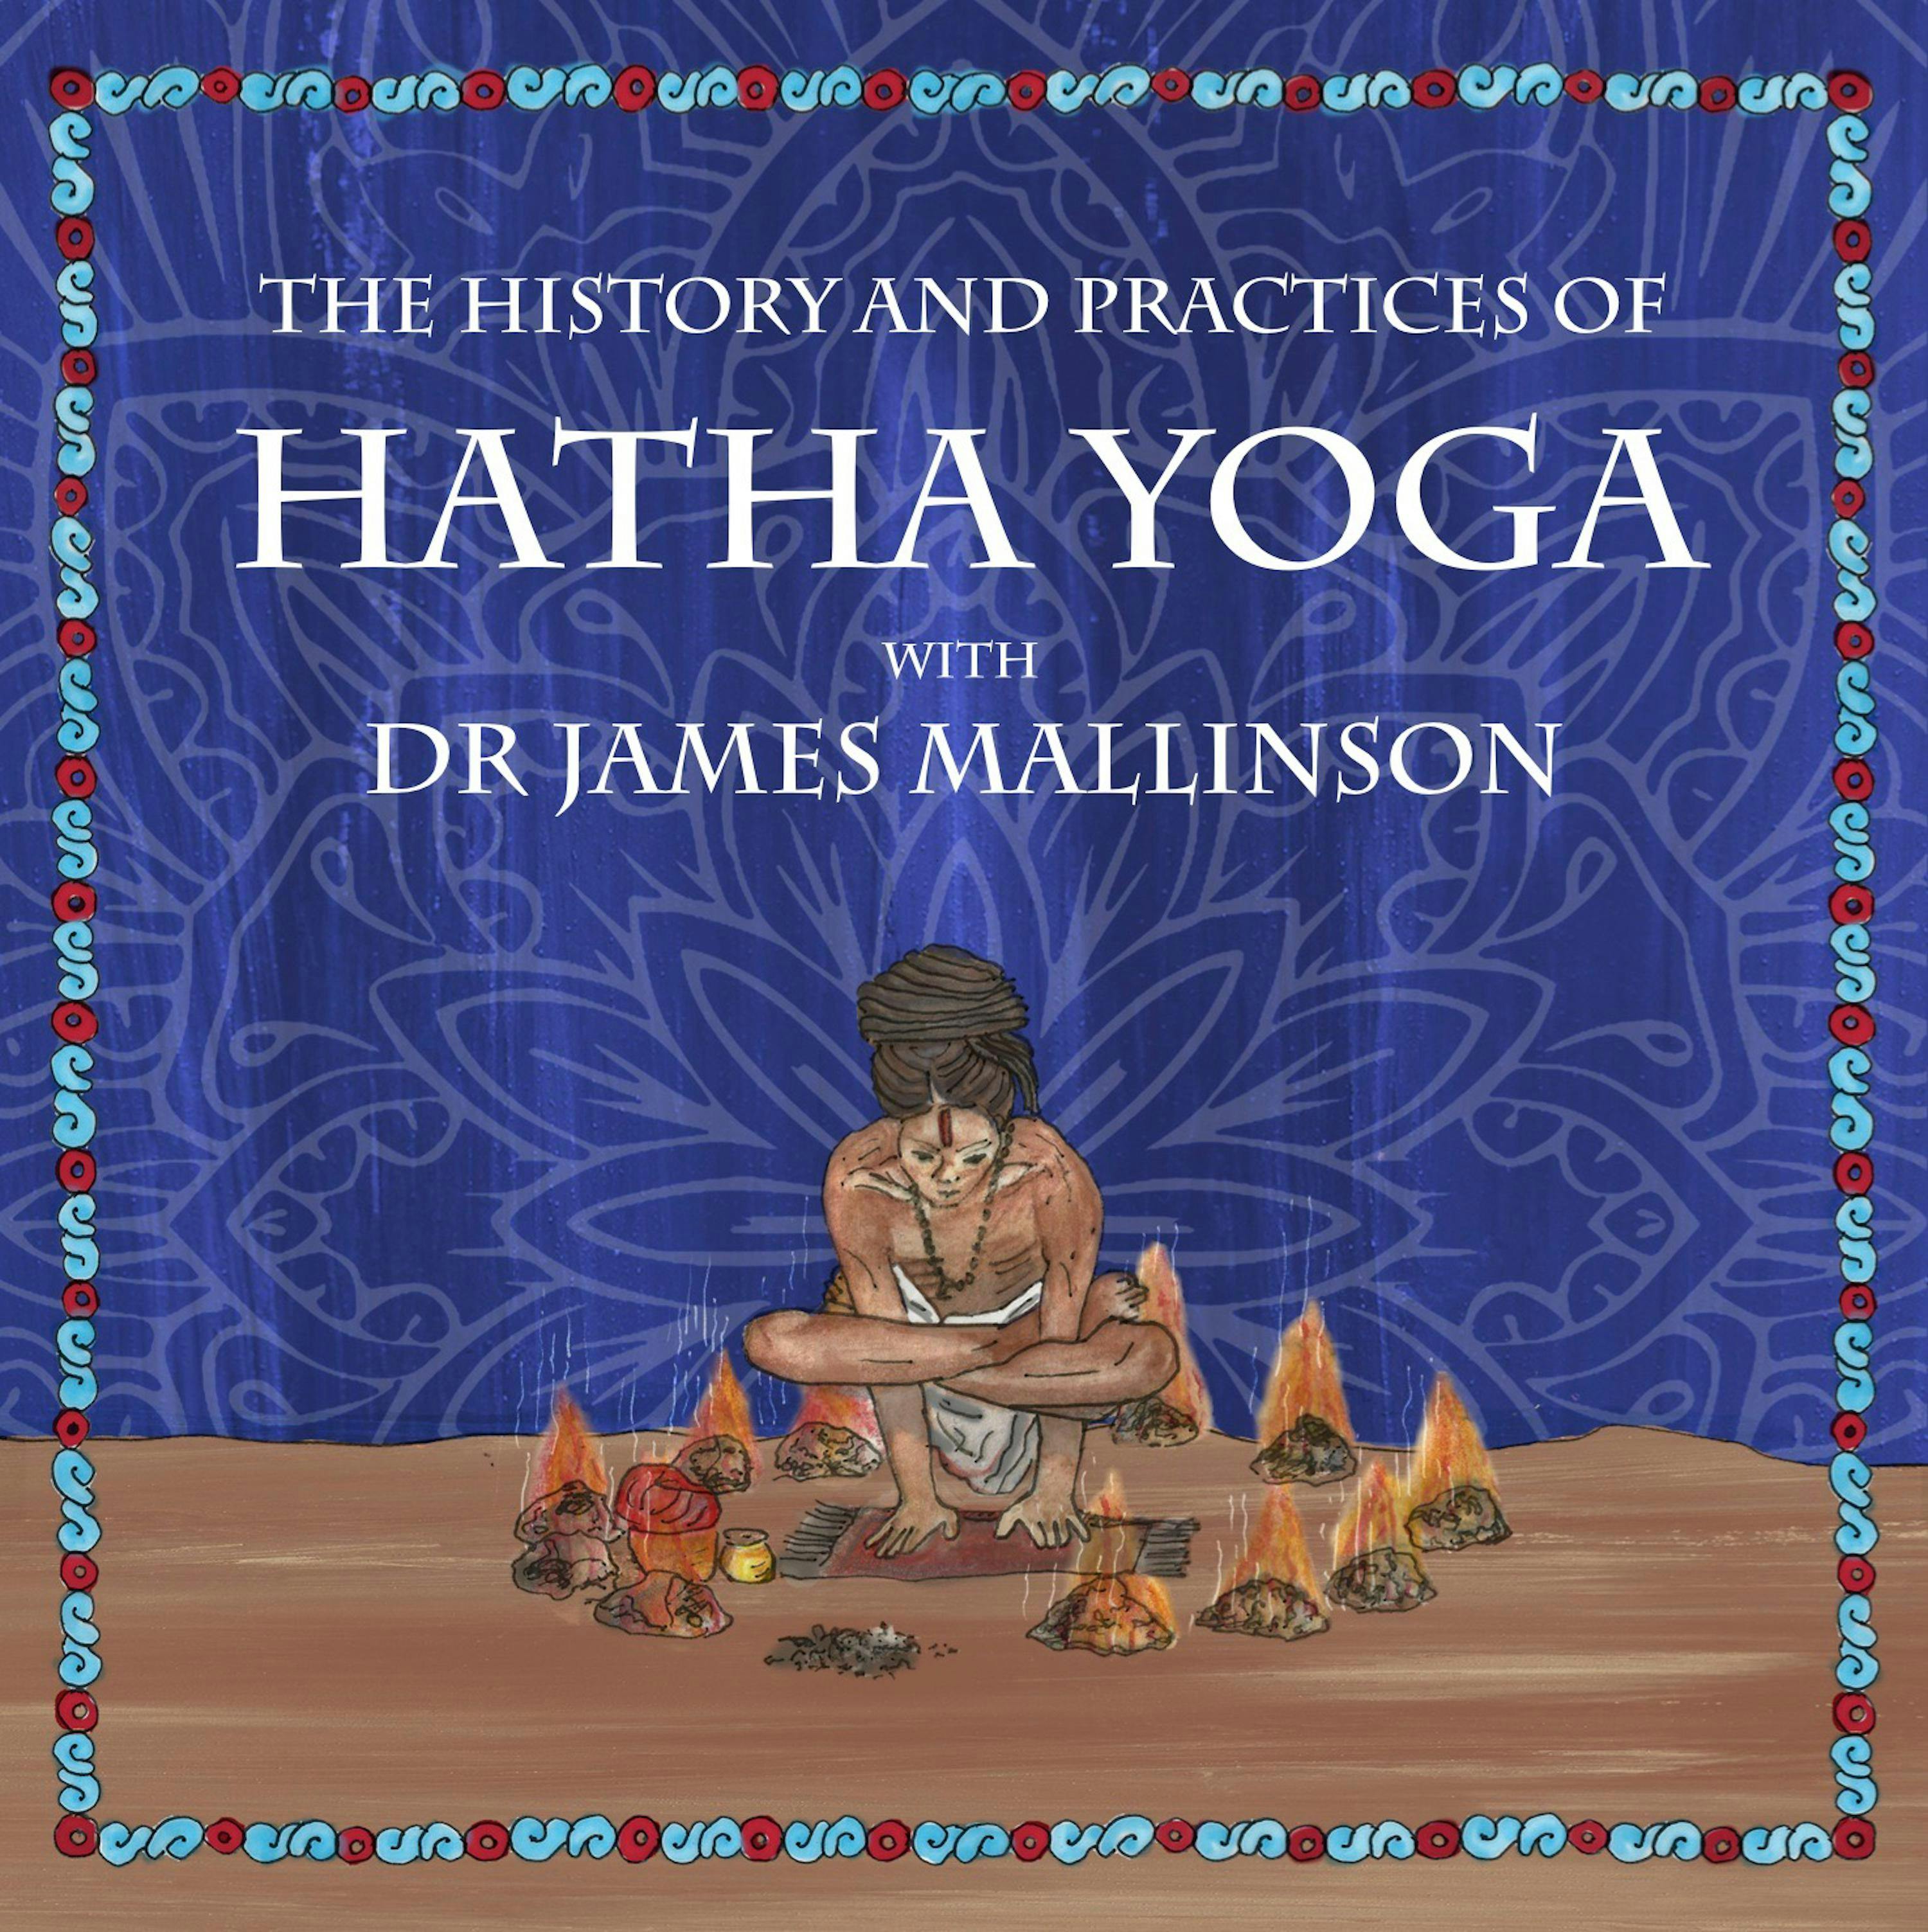 The History and Practices of Hatha Yoga with Dr James Mallinson - Dr. James Mallinson